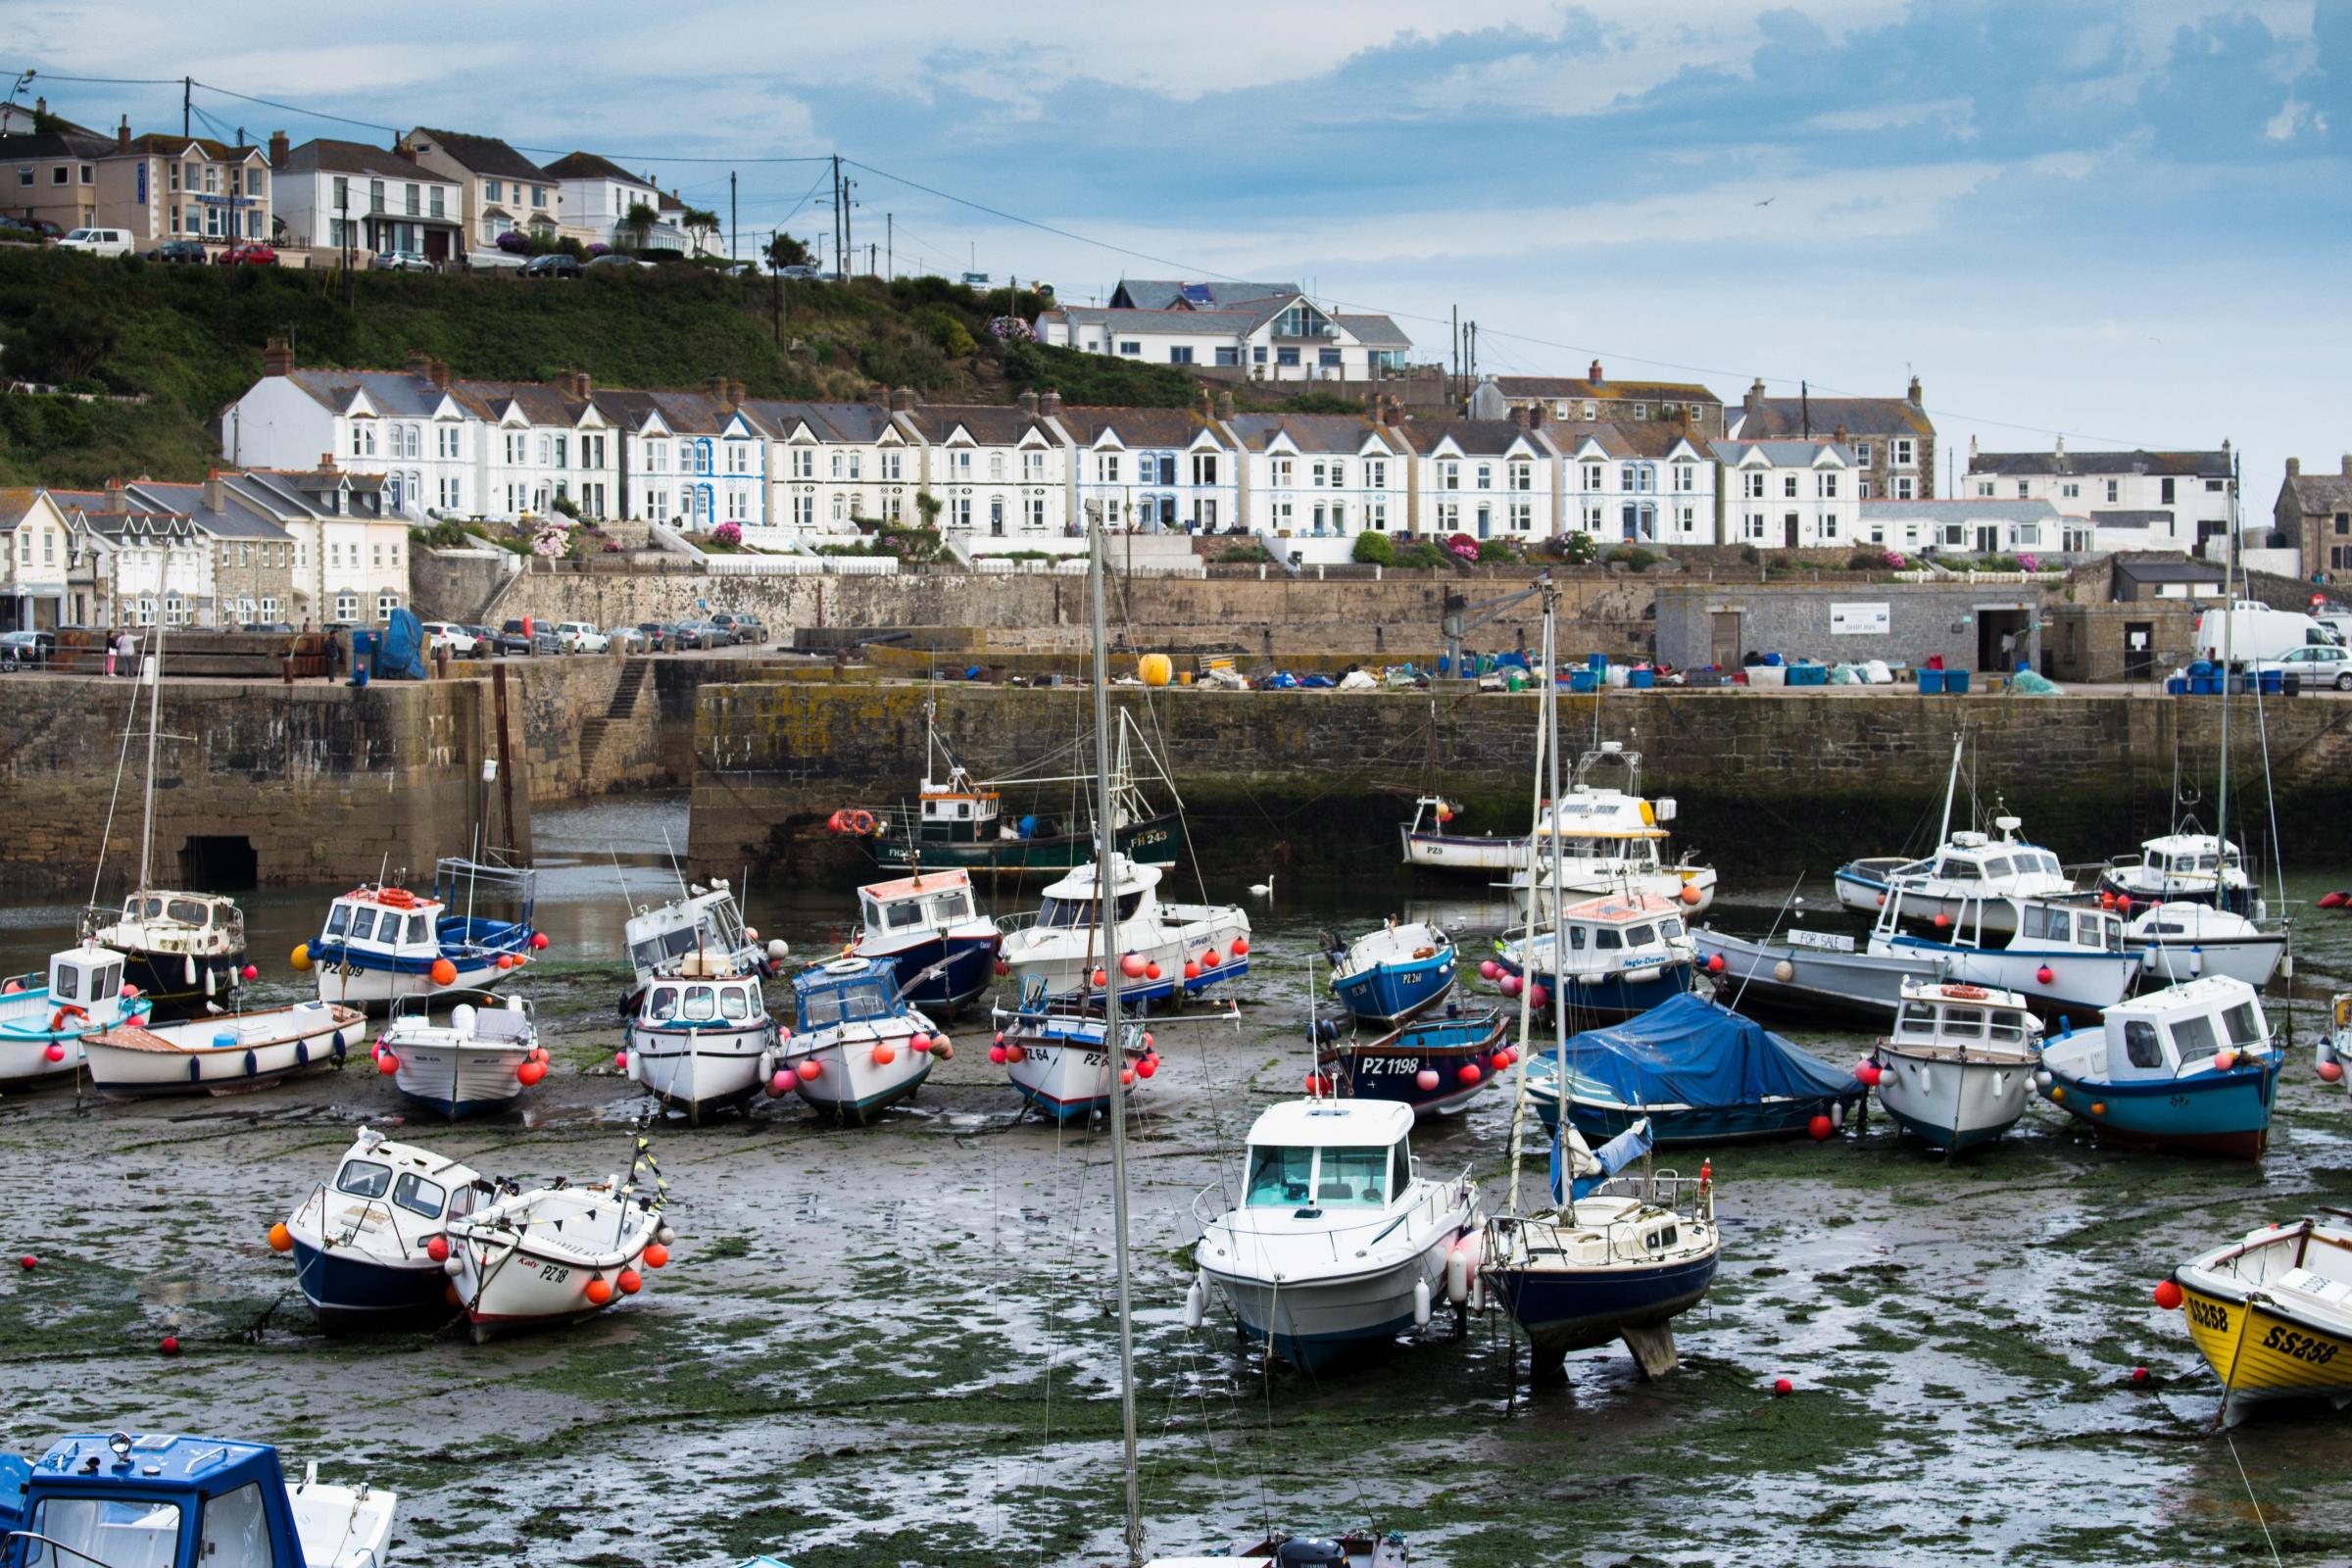 Porthleven - in the winter up to 90 per cent of lights go out as the houses are second homes. Photo: Pixabay